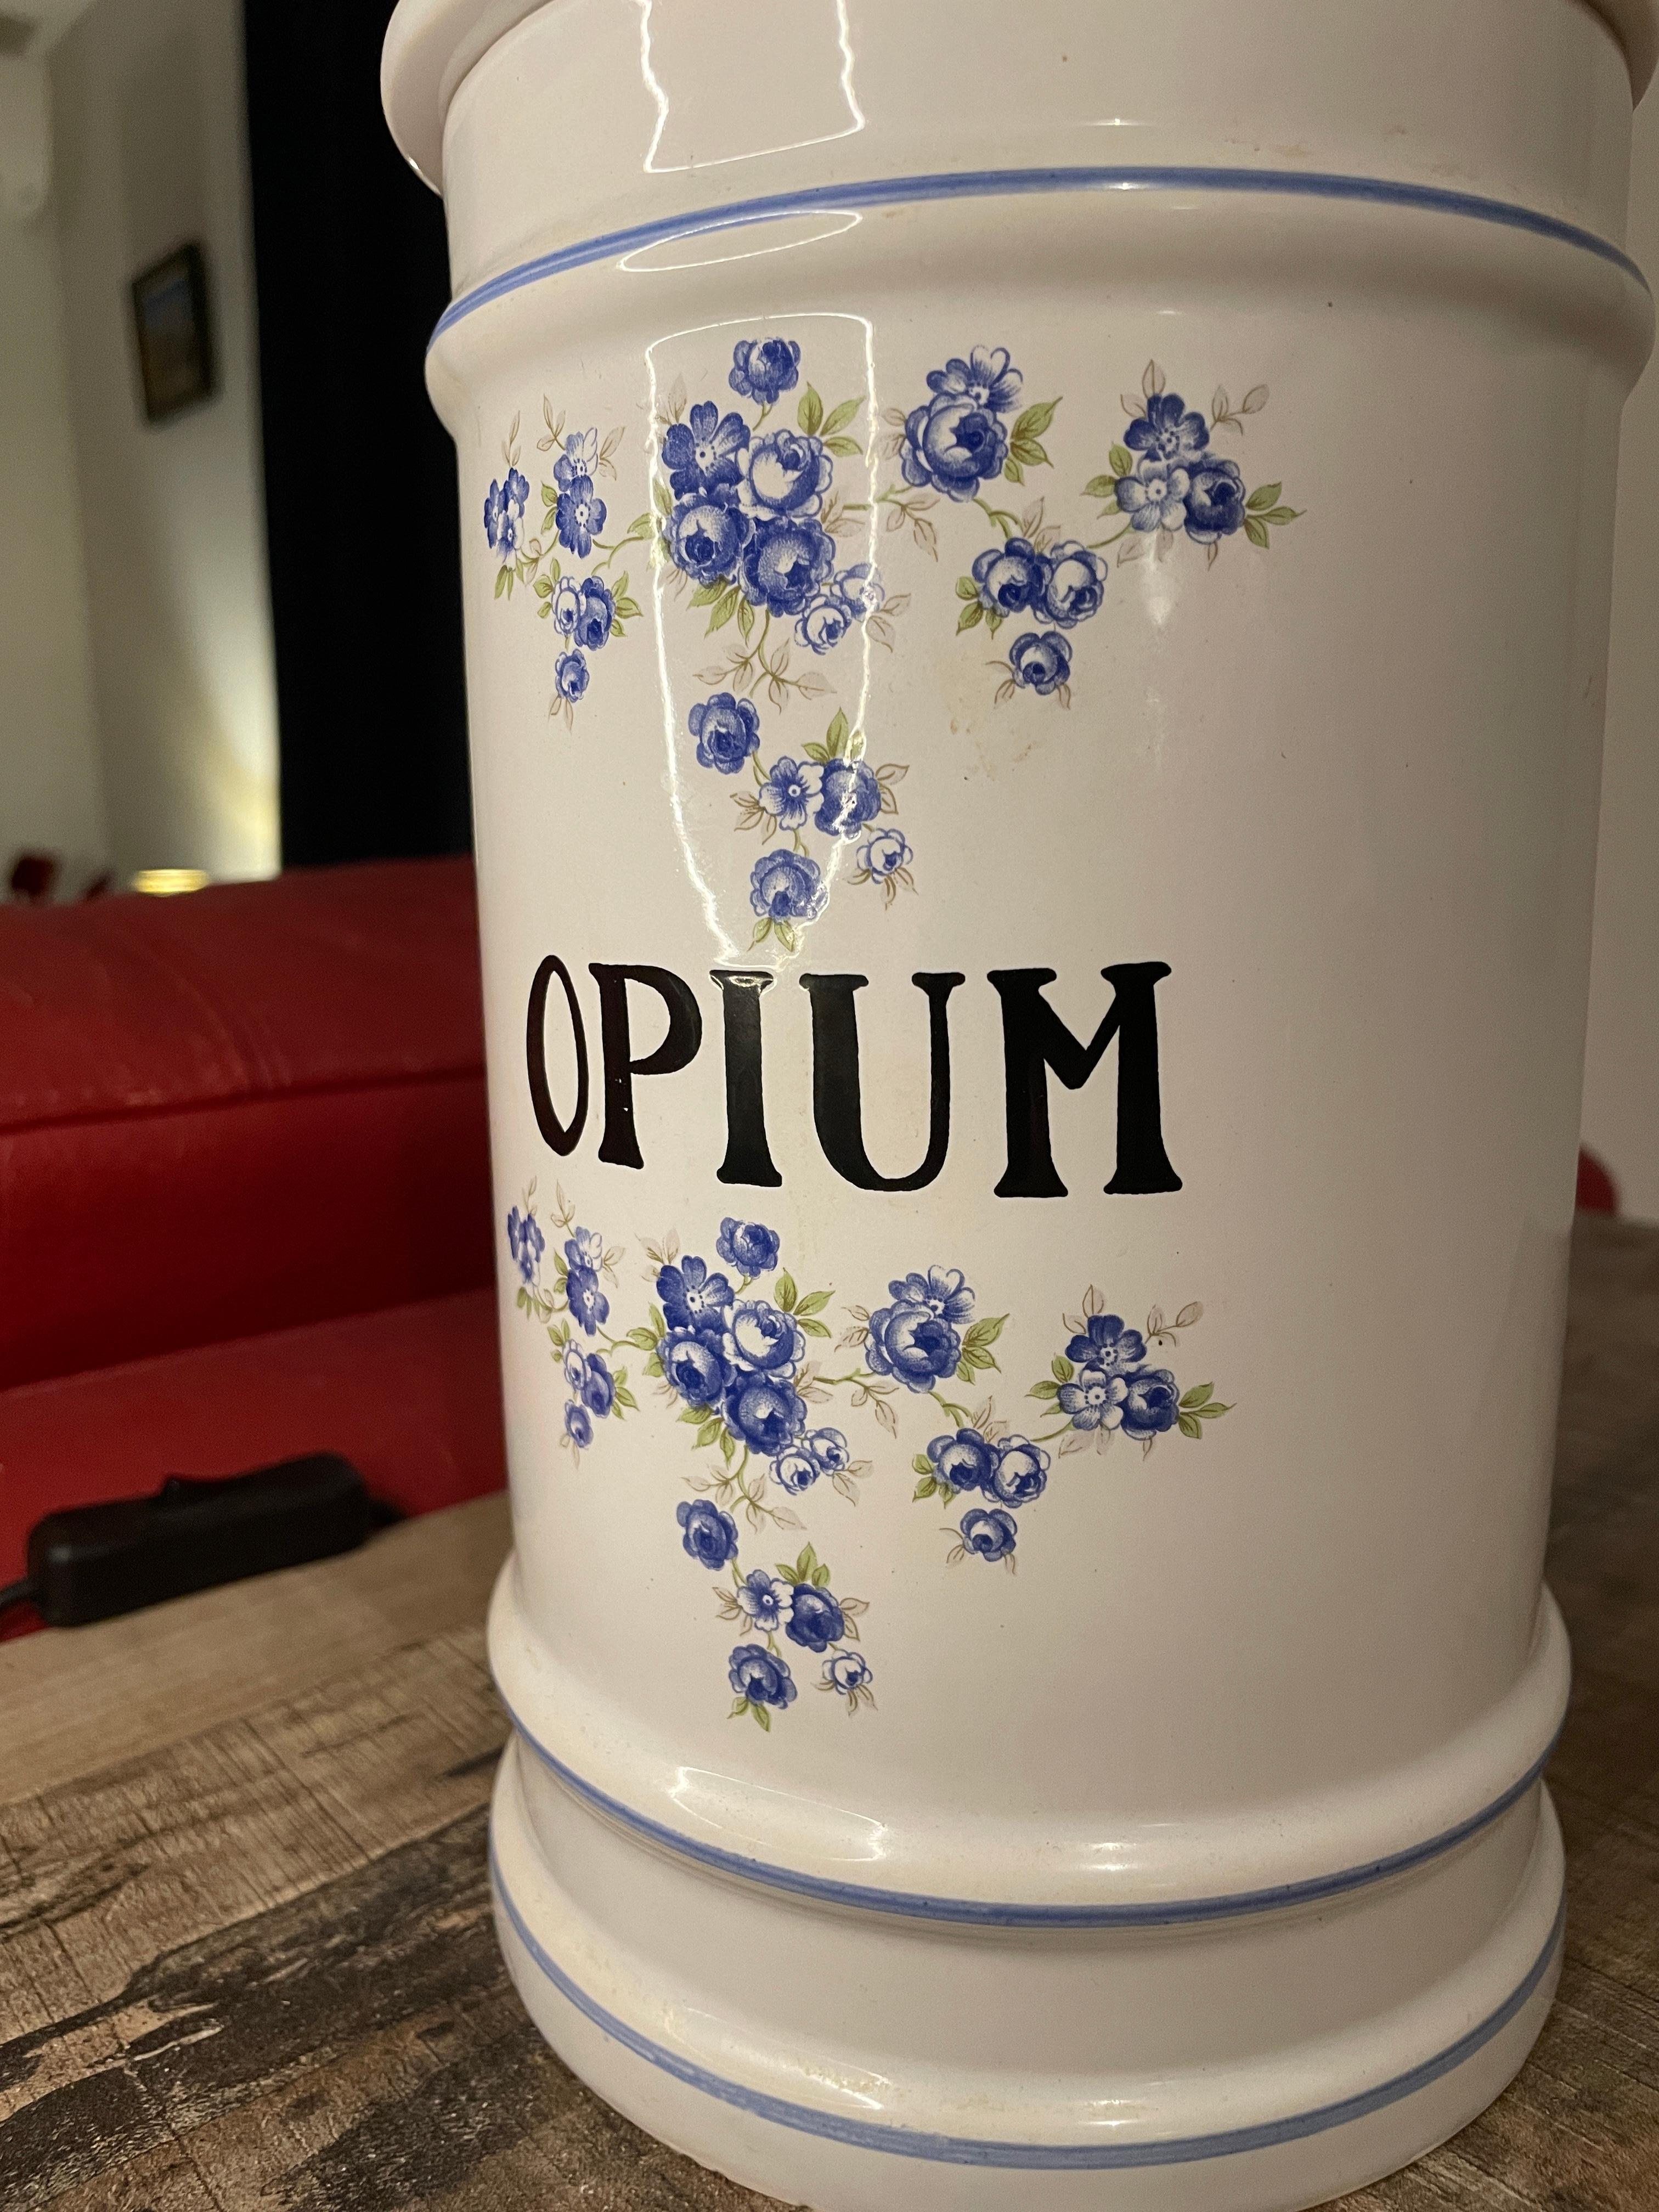 French 
« opium » Apothecary Jar. Very big.
1900s. France
Porcelain of Limoges.
Perfect condition.
Drug, cocaine, weed, heroin, haschich

